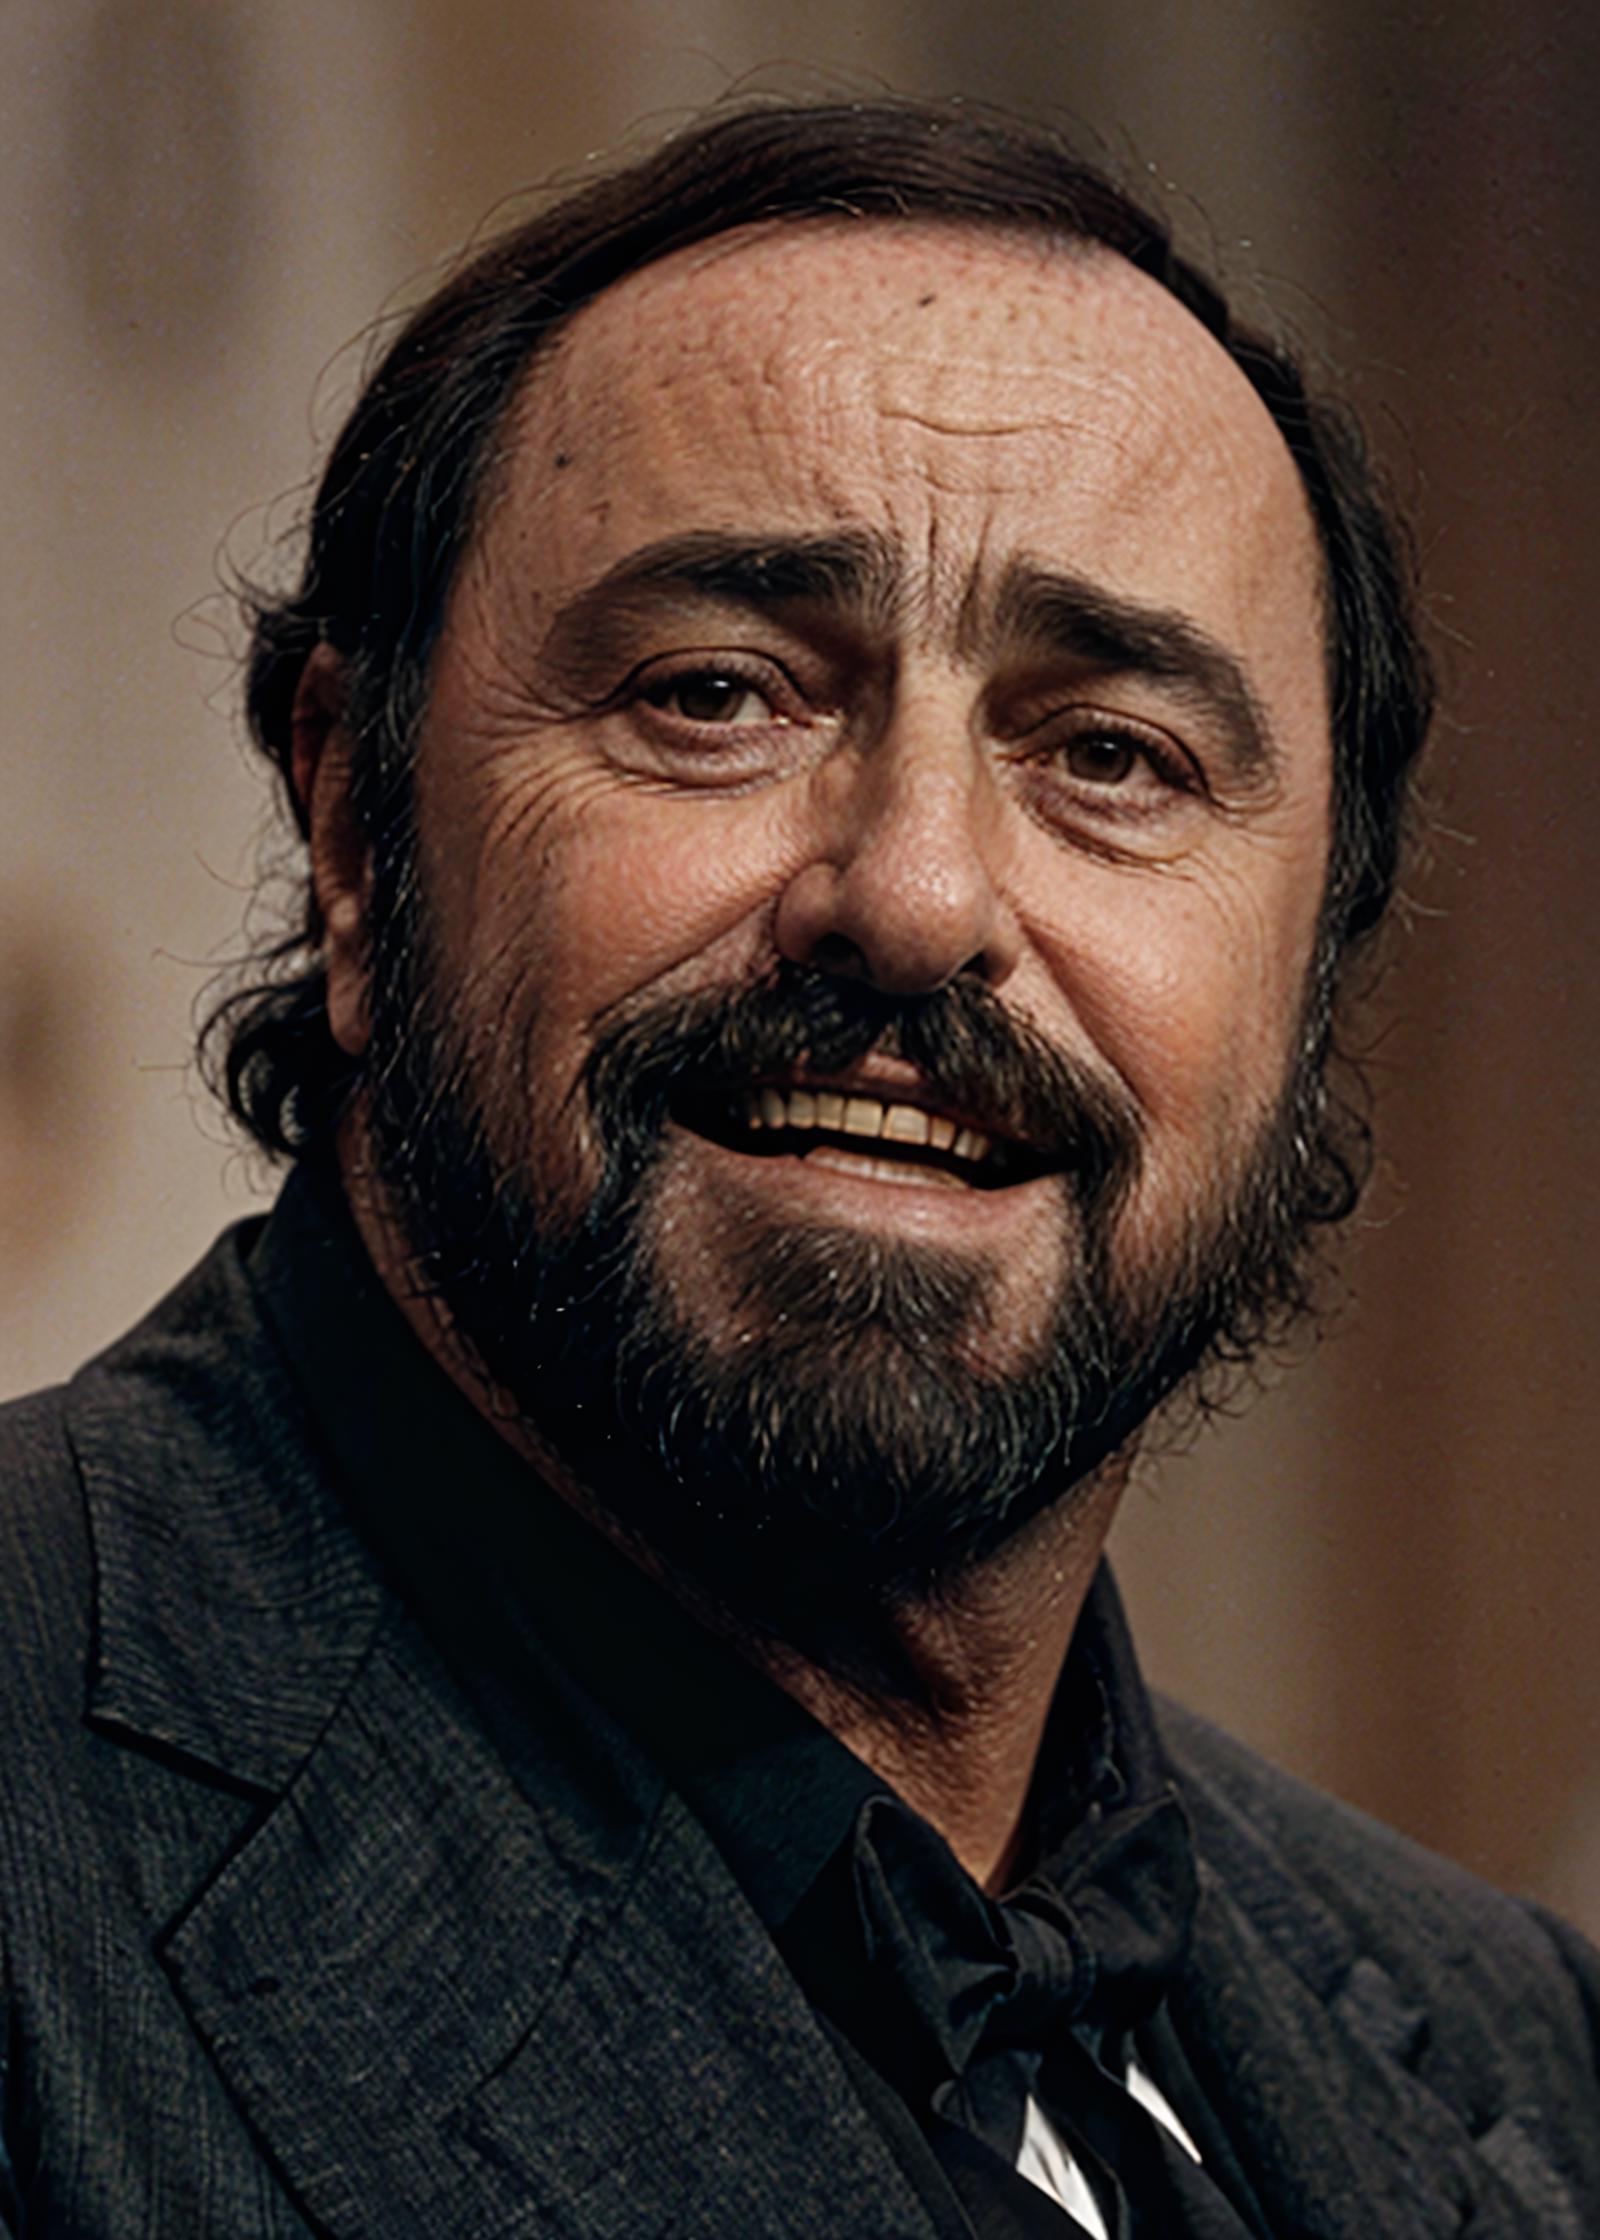 Luciano Pavarotti - Tenor image by thyaz